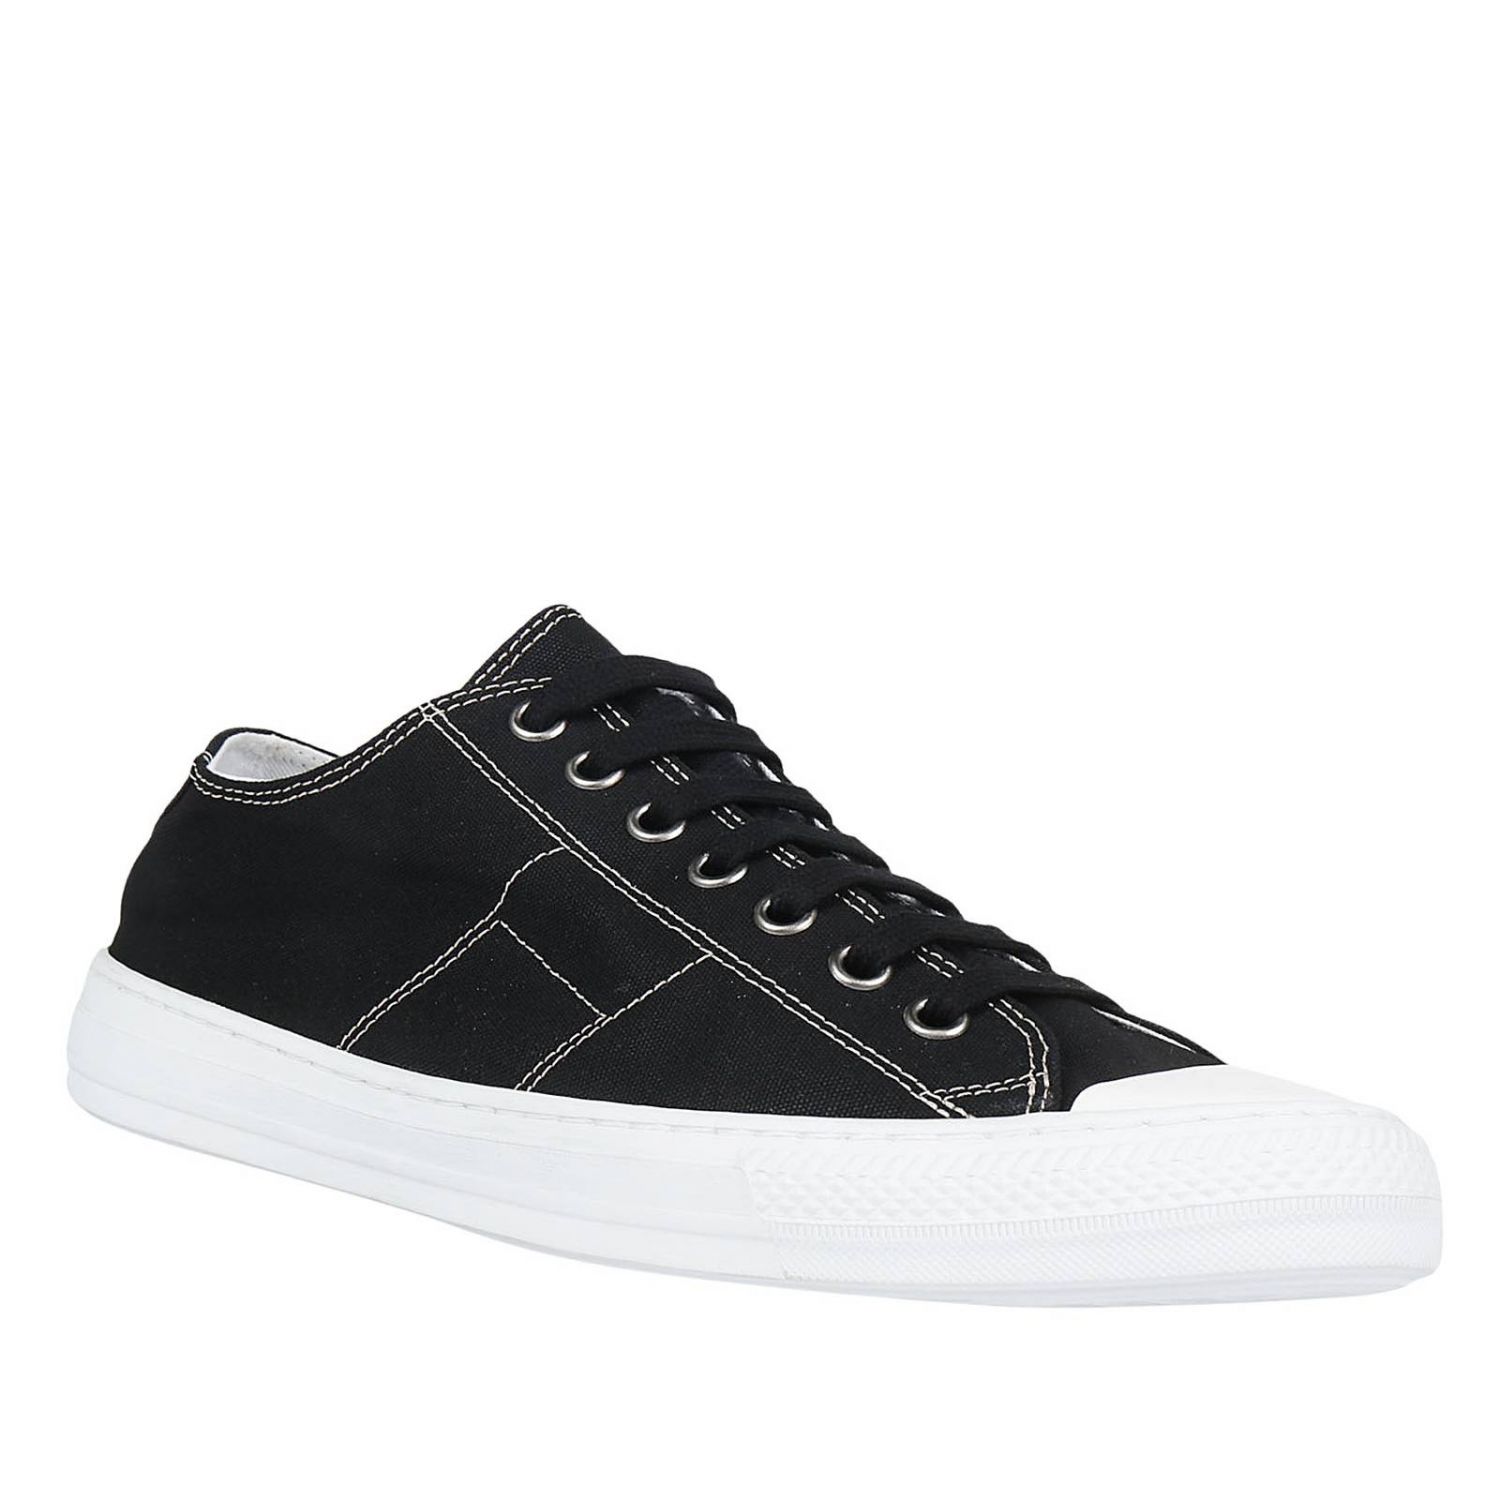 Maison Margiela Outlet: men's sneakers Classic in canvas with rubber ...